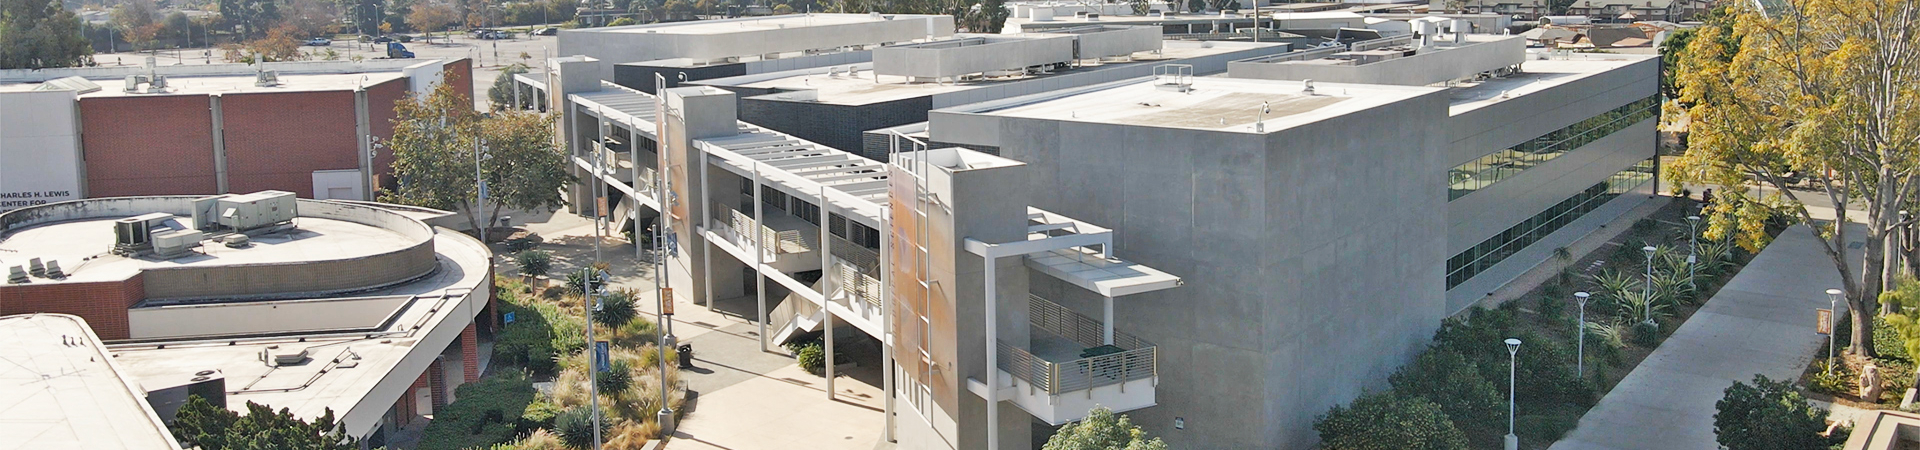 Aerial view of the Consumer & Health Sciences building